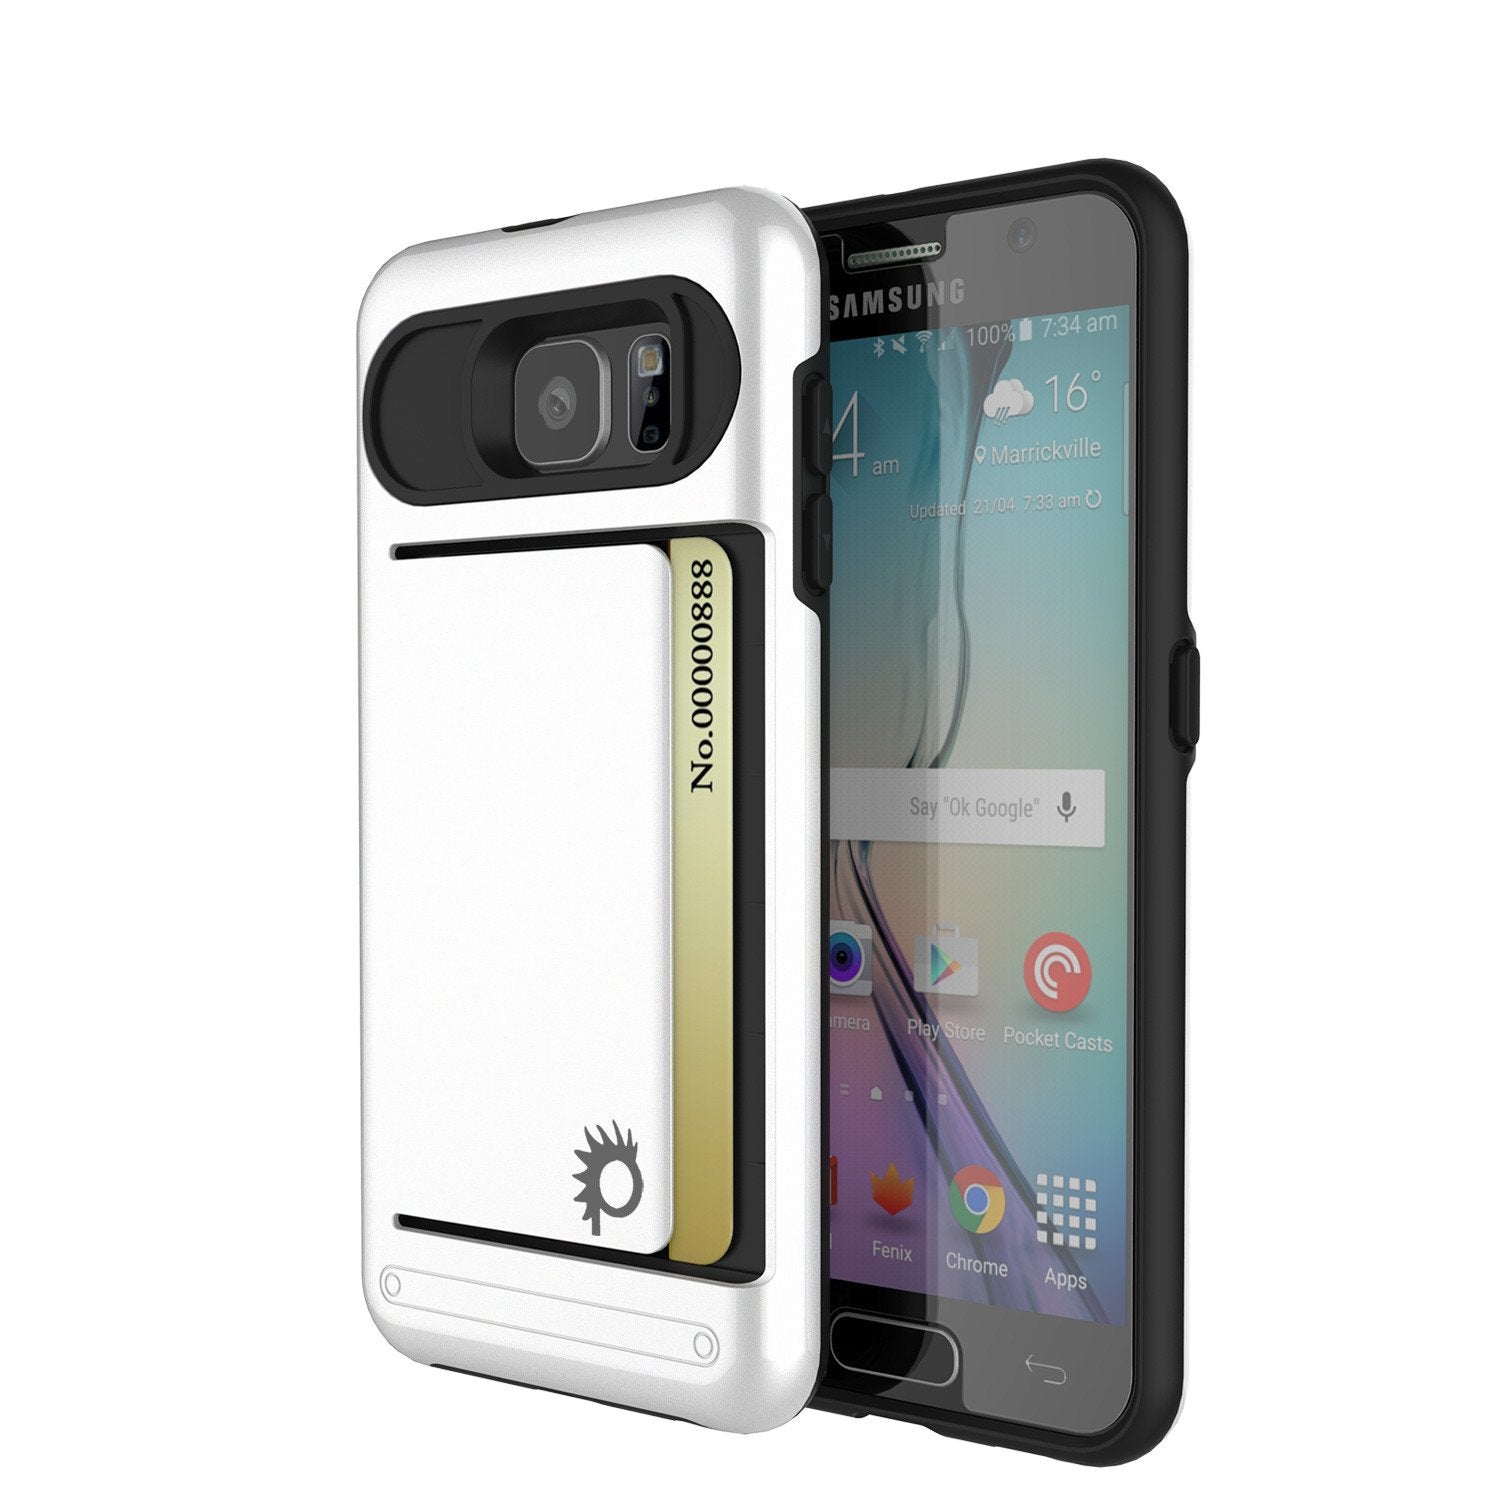 Galaxy s6 Case PunkCase CLUTCH White Series Slim Armor Soft Cover Case w/ Tempered Glass